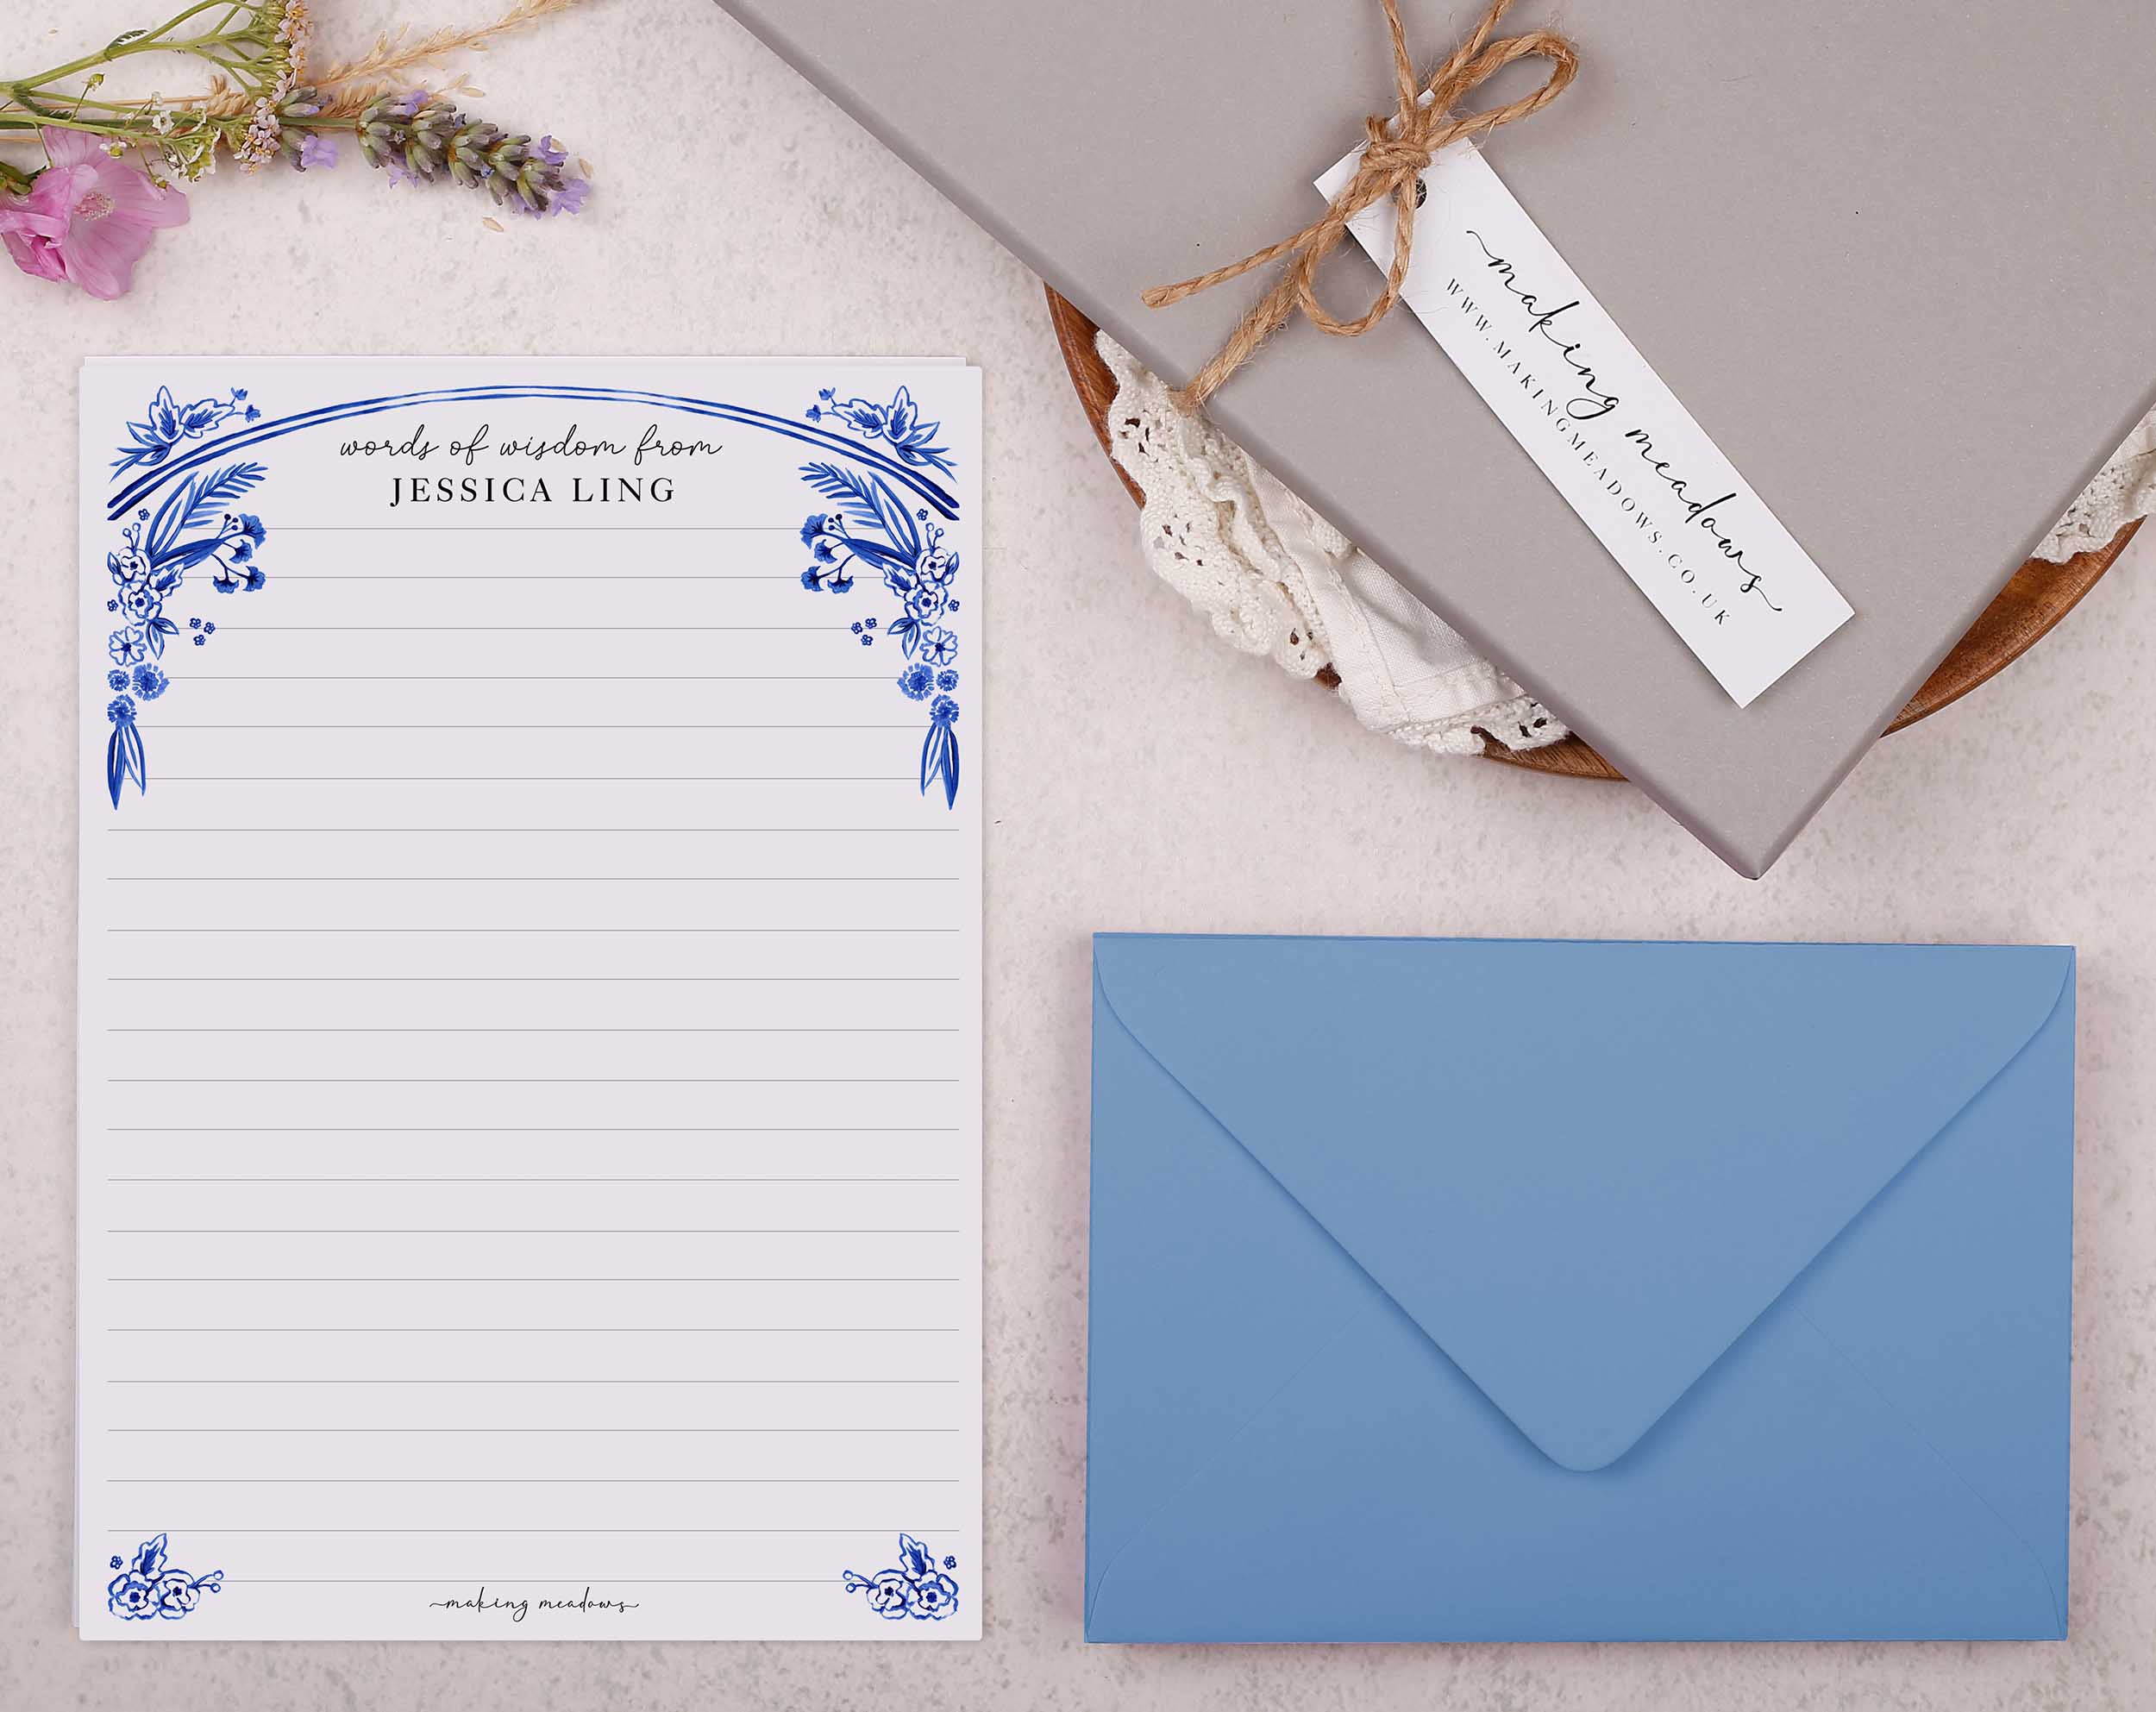 Premium personalised A5 letter writing paper set with a handprinted watercolour floral border in a china blue porcelain design.